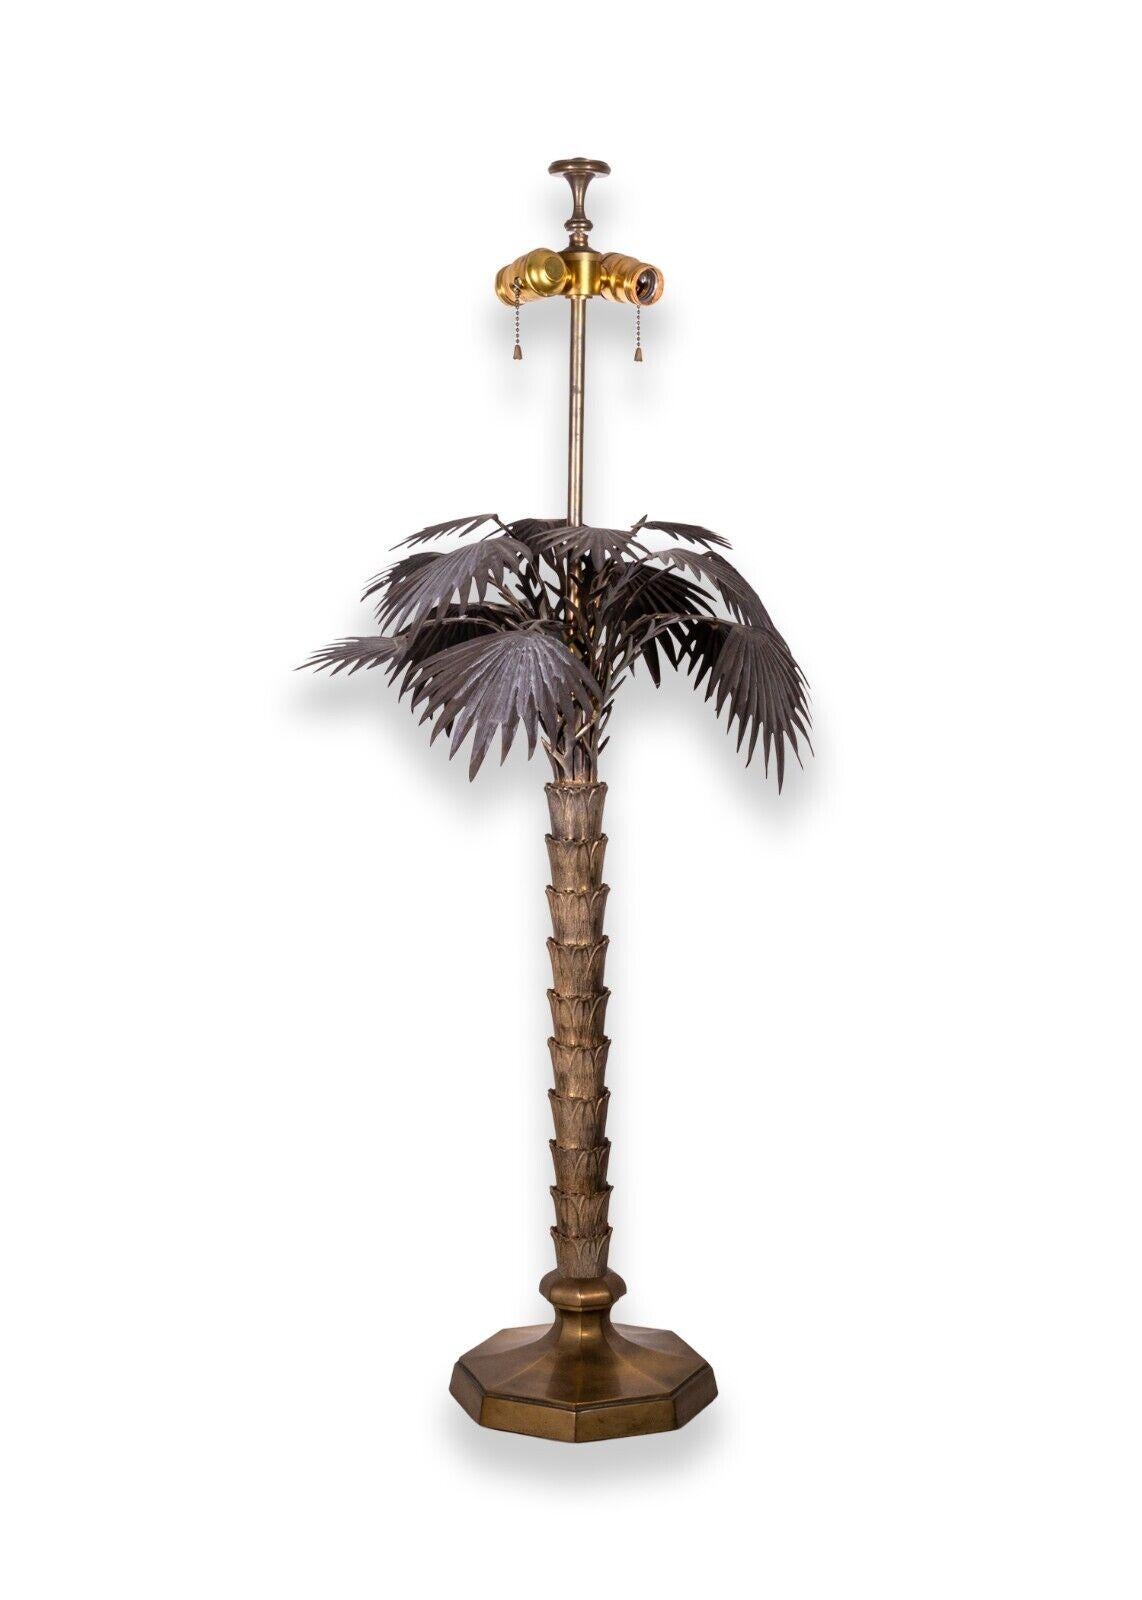 A mid century modern pair of vintage bronze palm tree table lamps. A lovely pair of bronze lamps that resemble palm trees. These two lamps feature a very sculptural design with intricate details as you take a closer look. These pieces are in very